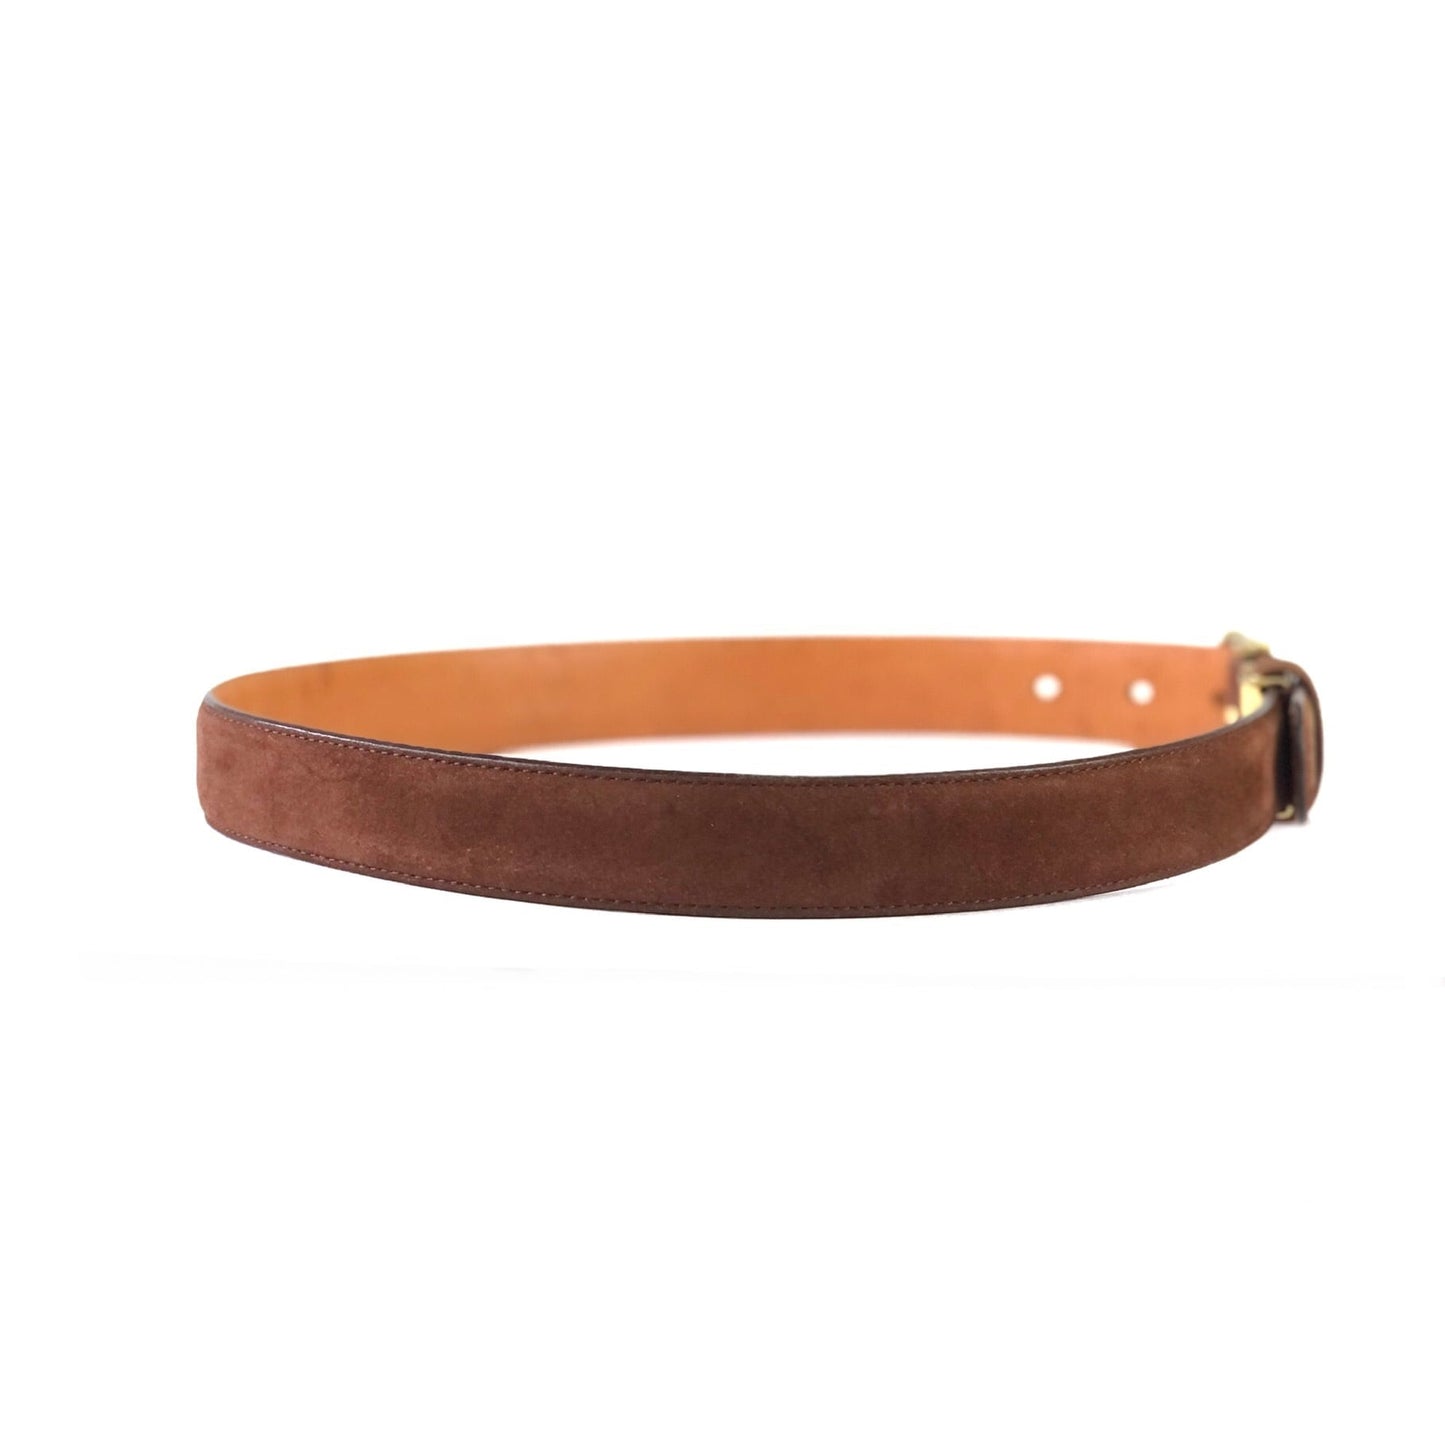 Burberrys Burberry logo belt leather suede brown jvypa3